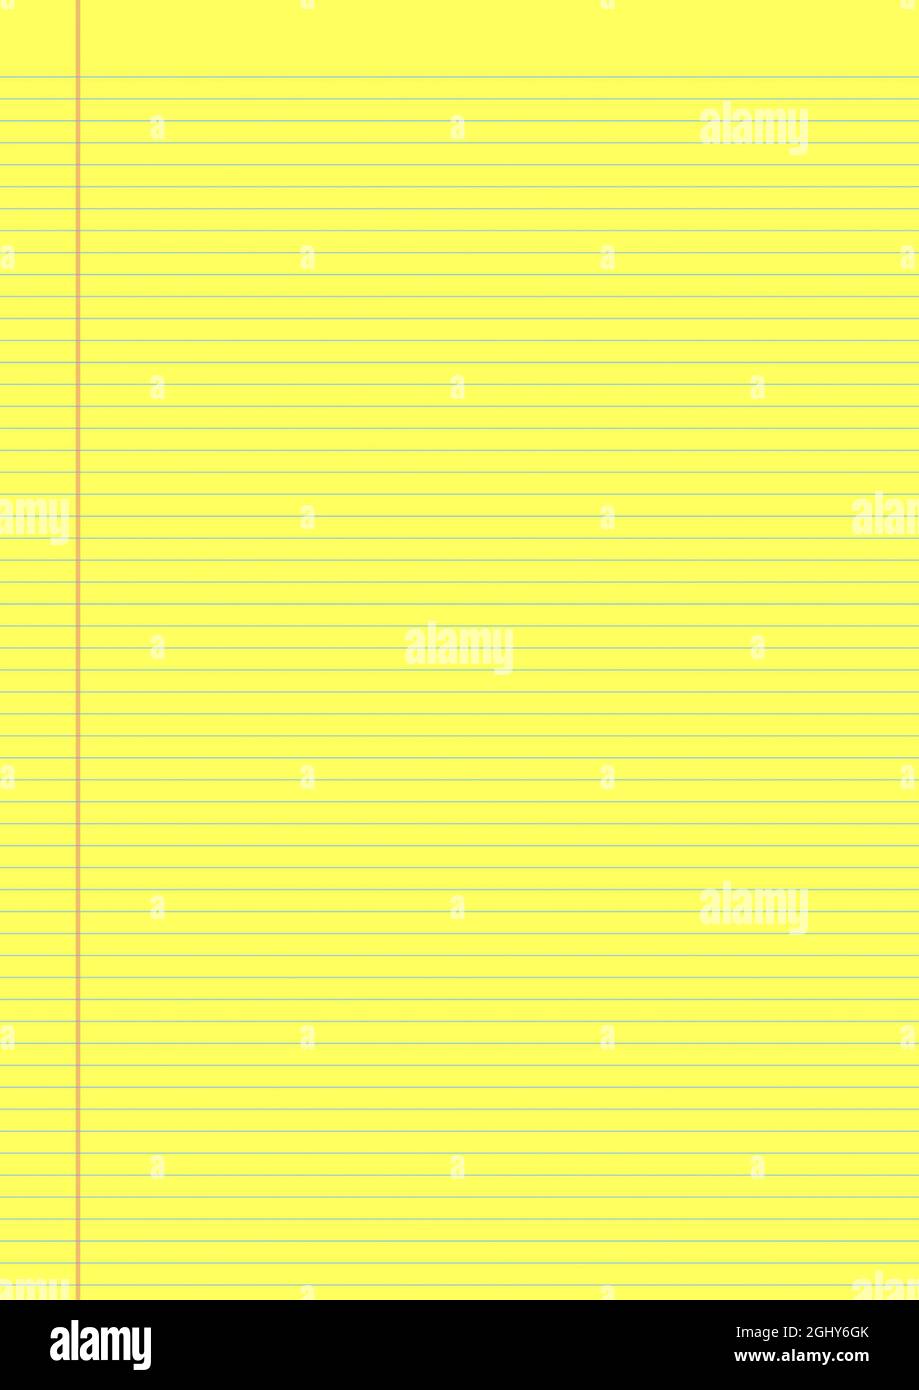 Ready yellow loose leaf ruled paper grid for printing out, when you just can't find any looseleaf rule paper. This solves that. Just leave the size at Stock Photo